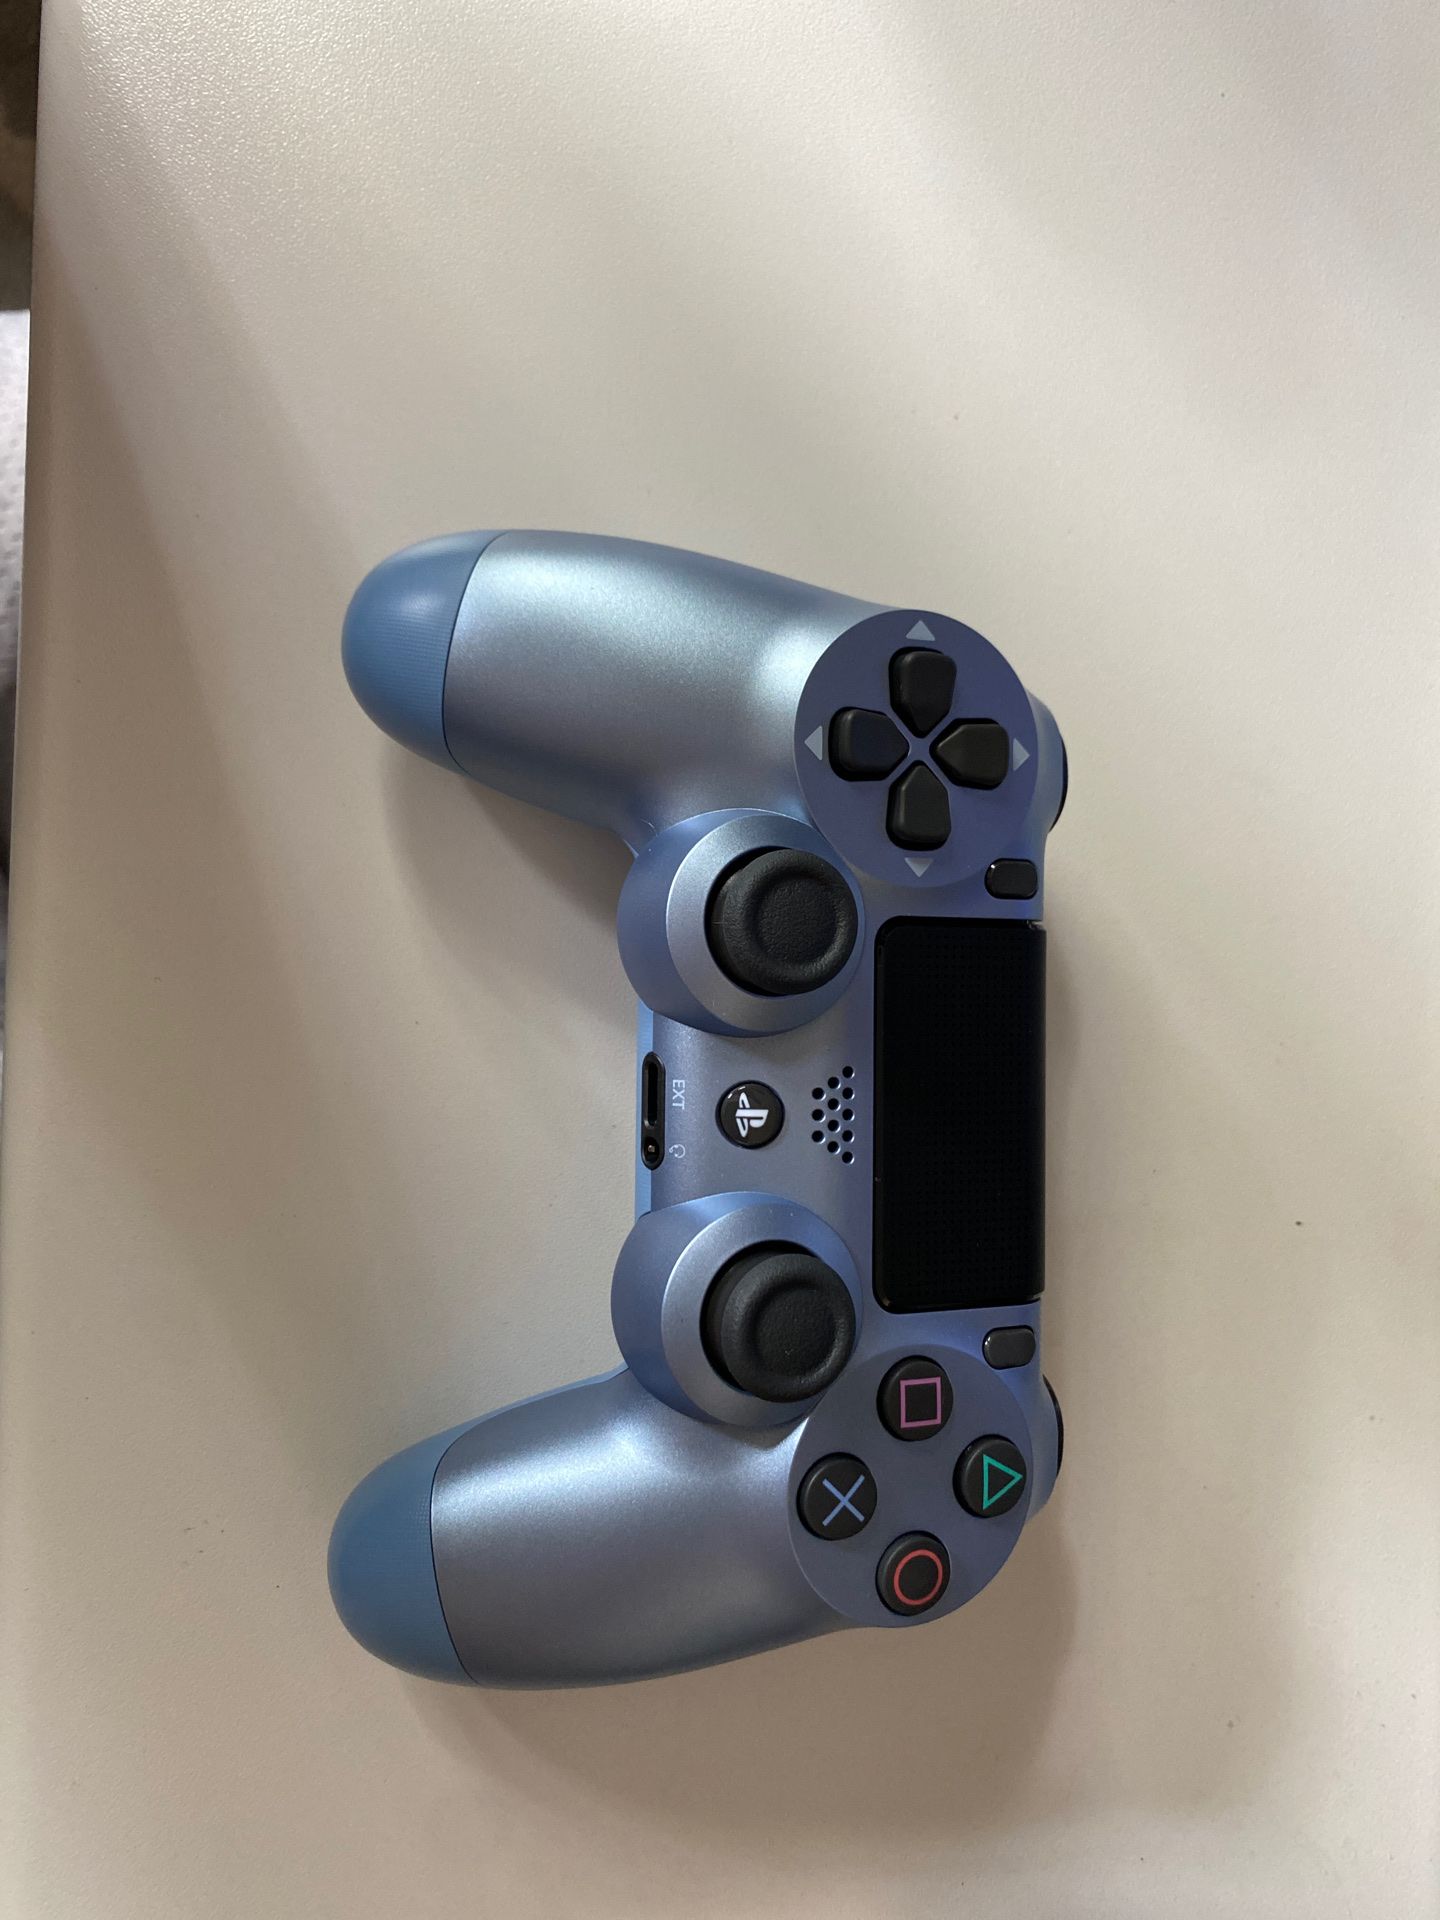 PS4 Controller, BRAND NEW, NEVER USED